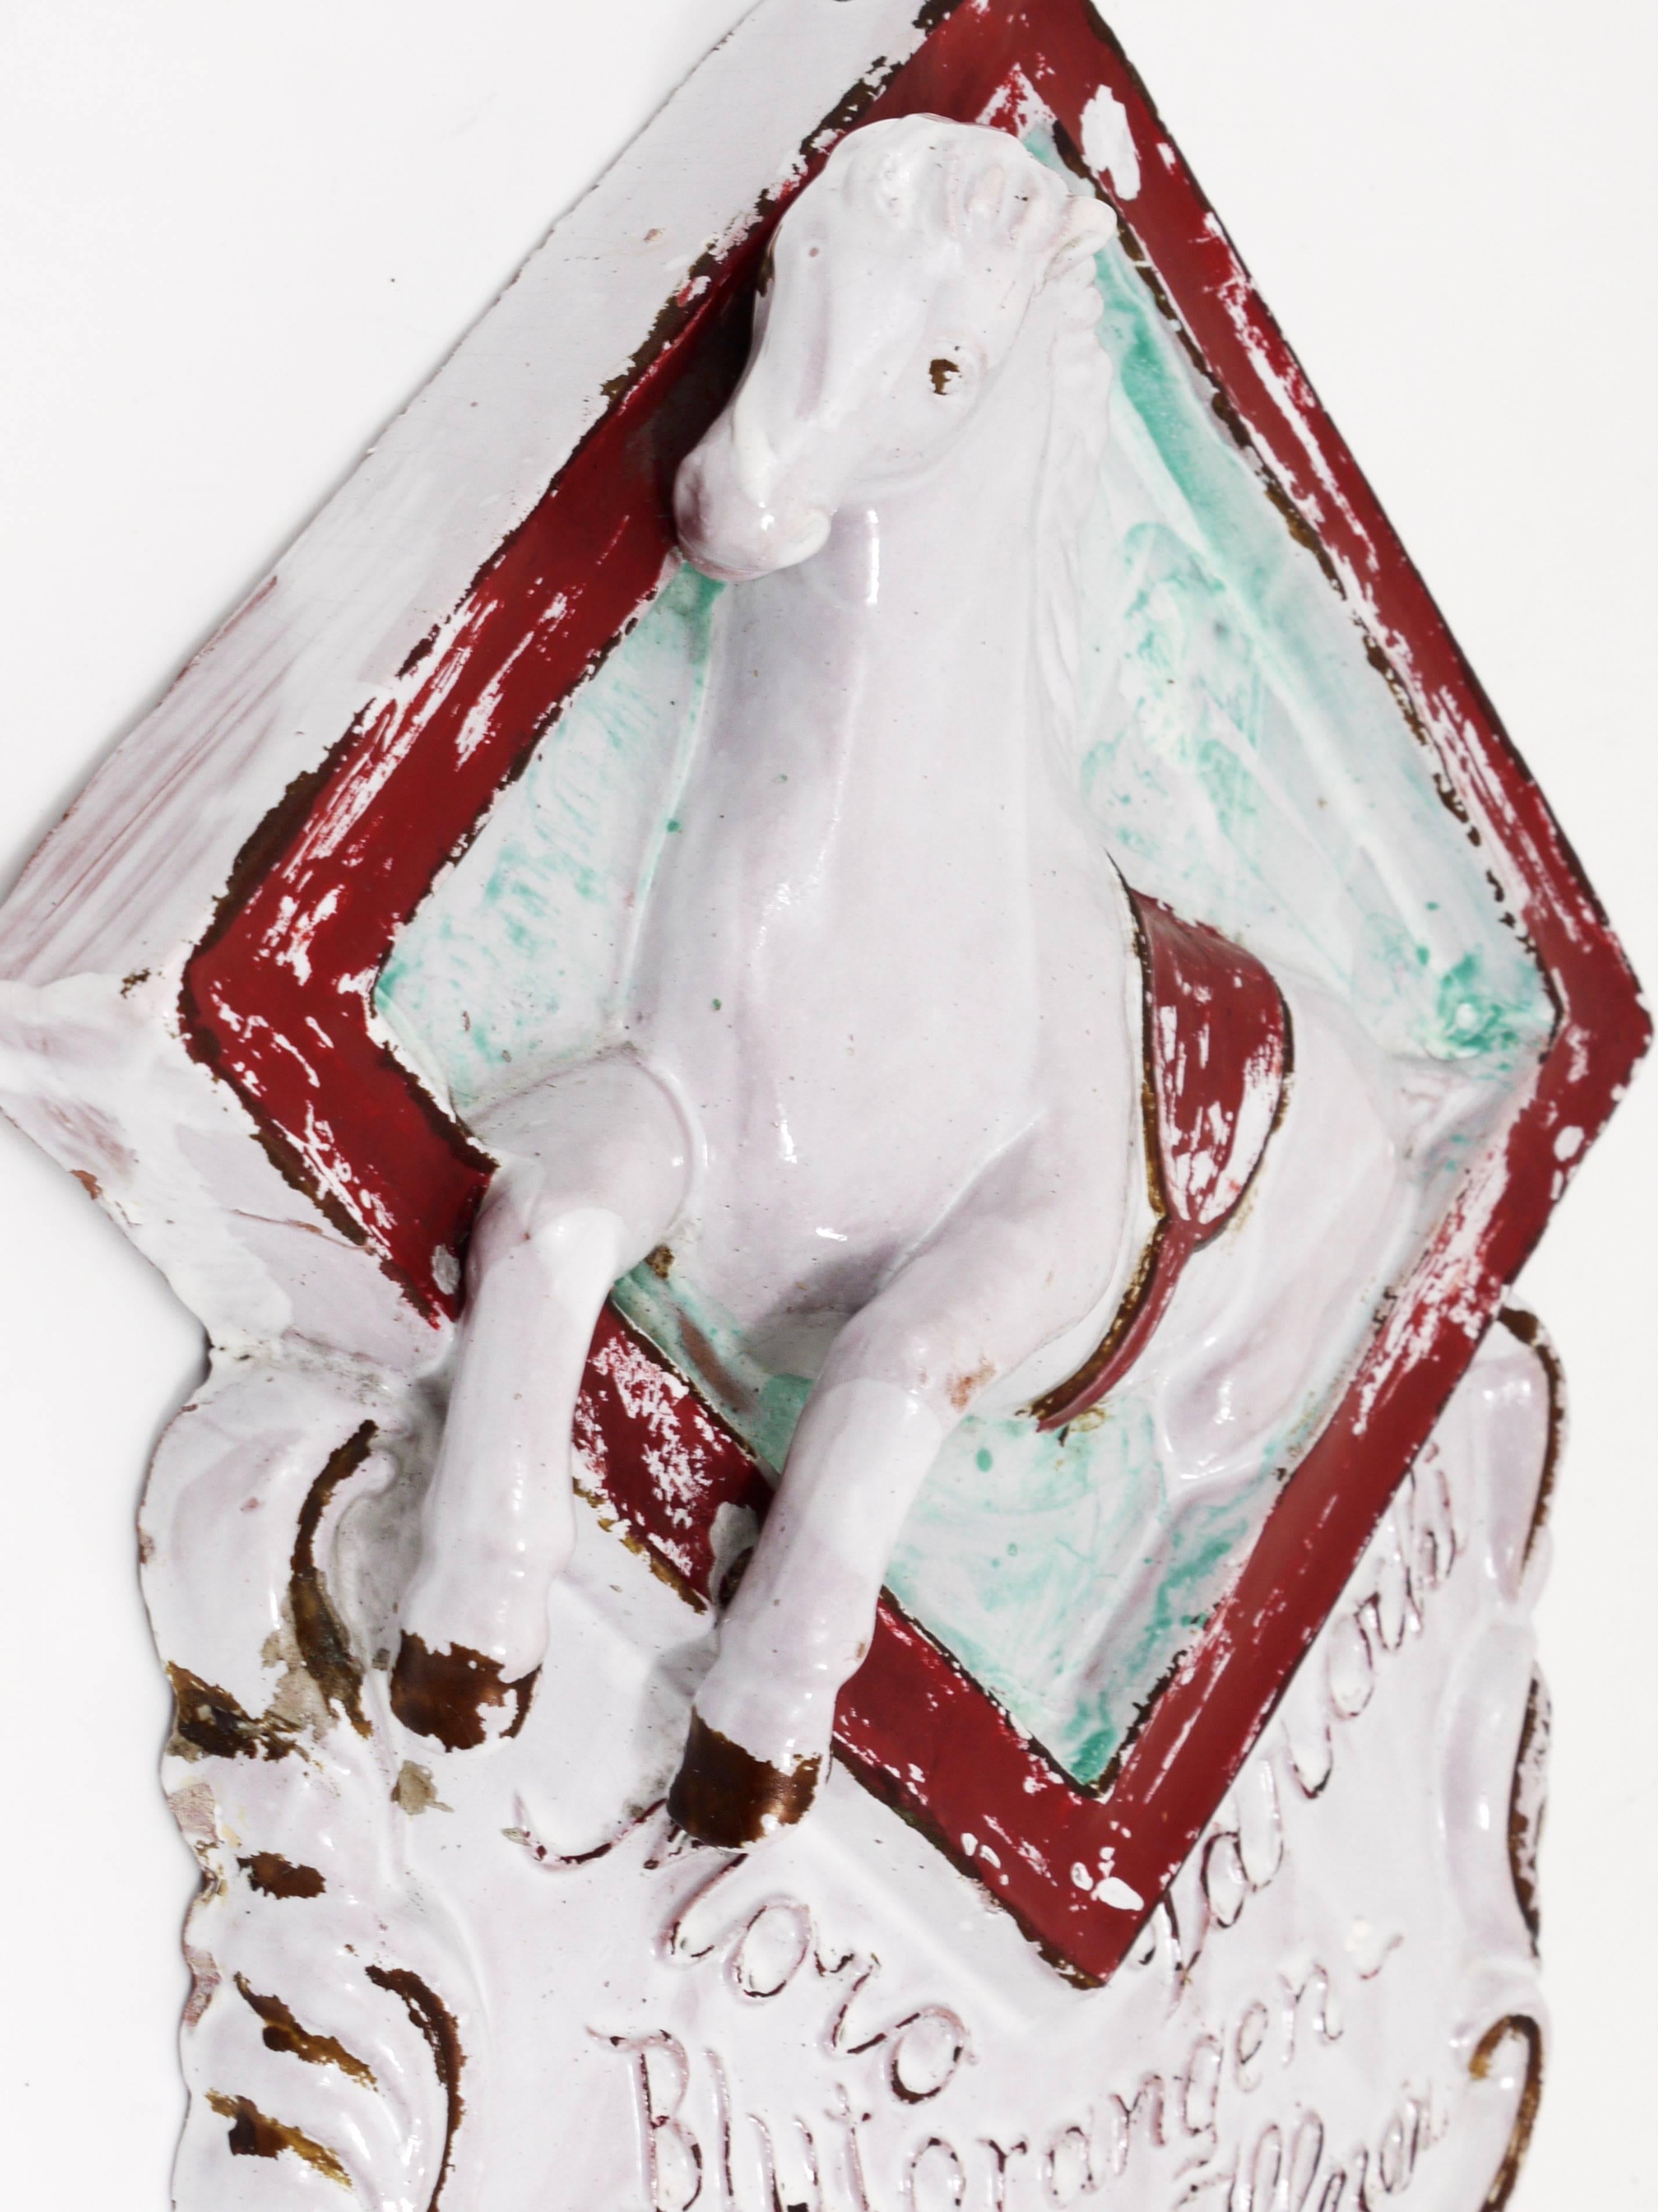 A decorative advertising sign, made of ceramic, dated around 1920s, made in Italy. An advertising sign for selling Italian blood oranges, displaying a white horse. Good condition with charming signs of age.